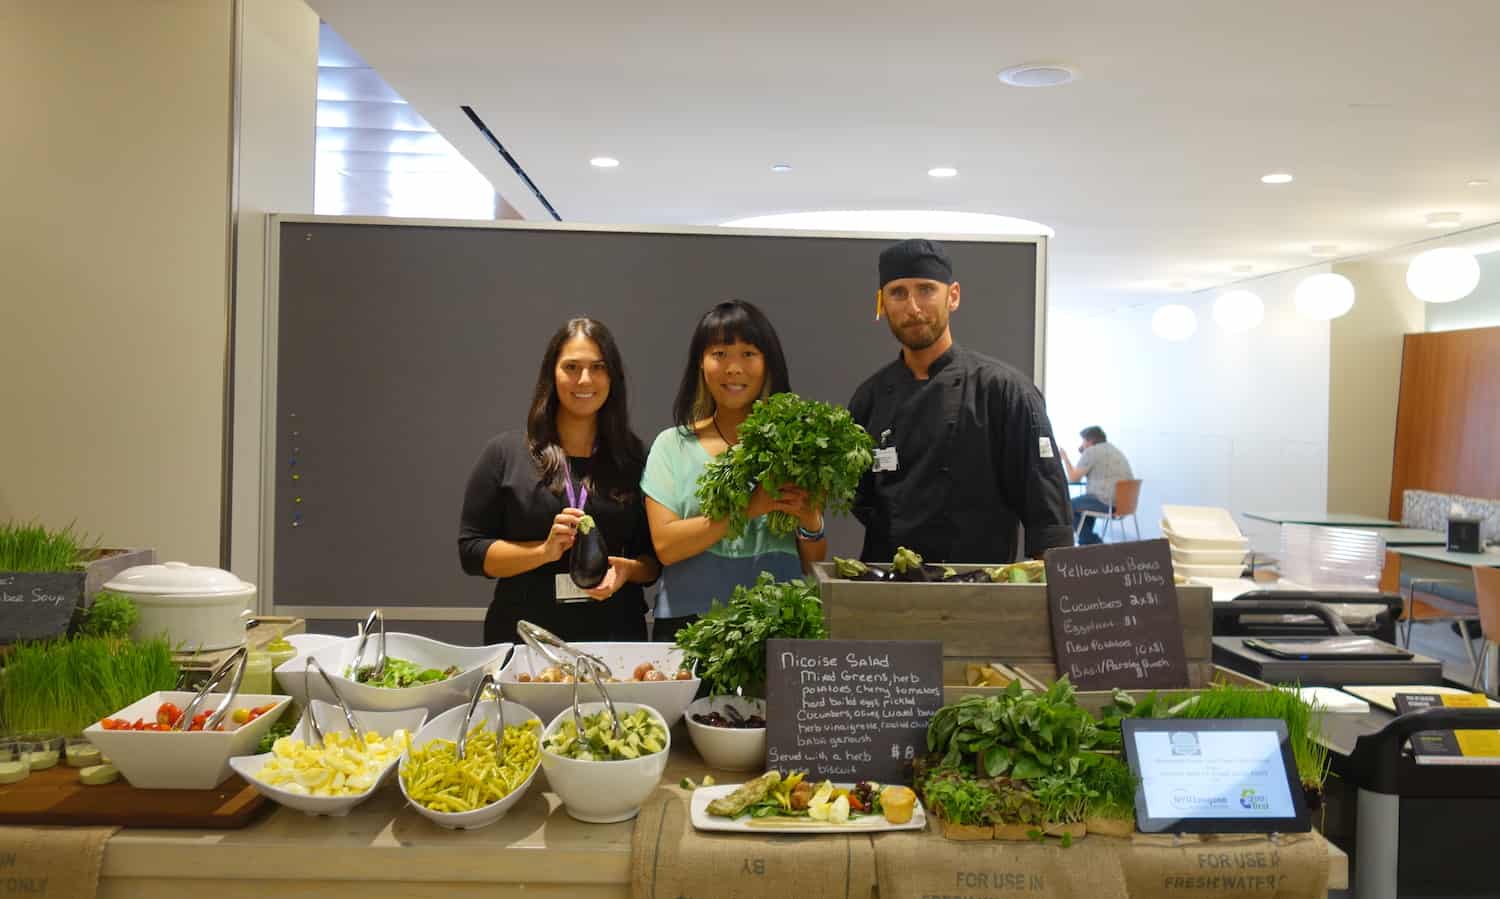 Professional chefs are taking over hospital cafeterias and patient menus, gathering locally sourced ingredients with the power to heal.